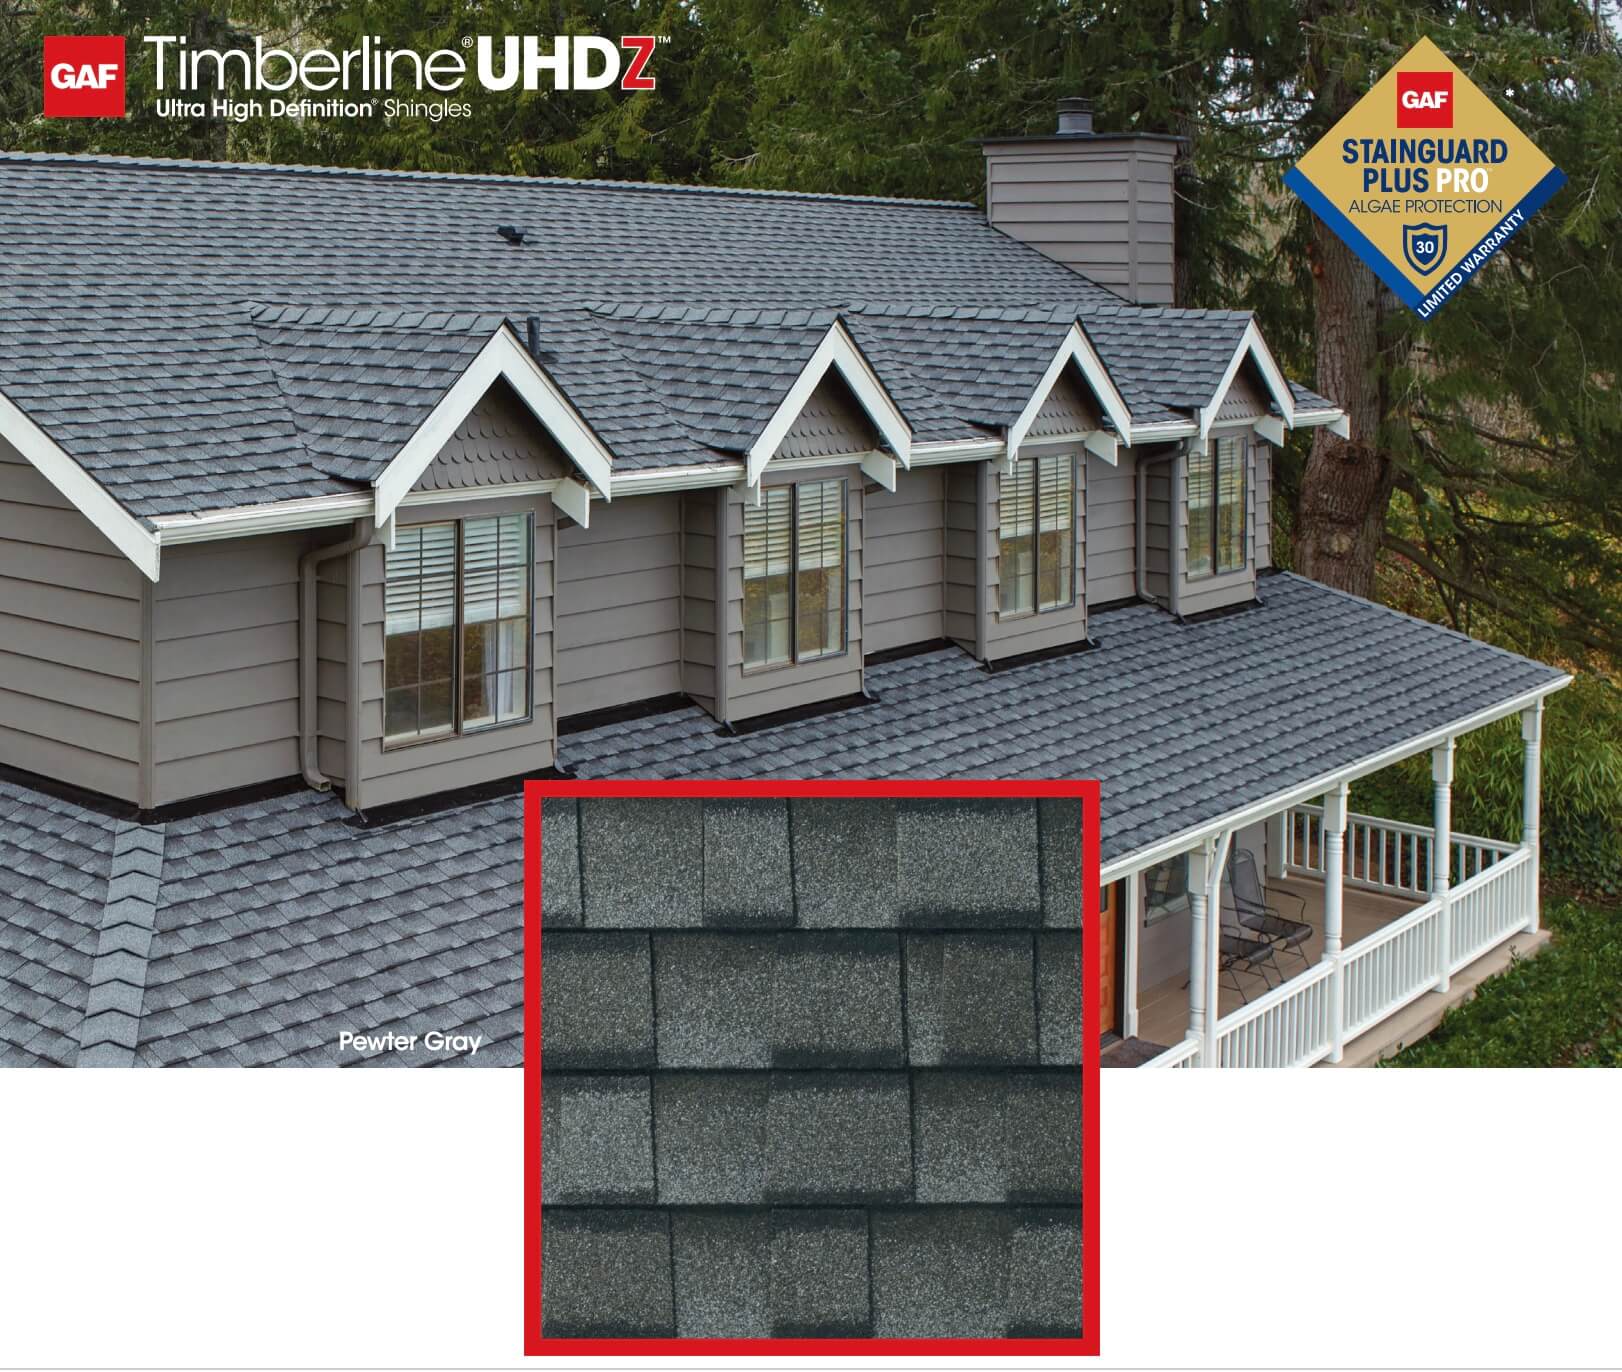 GAF Timberline UHDZ Shingle up close with a home in the background